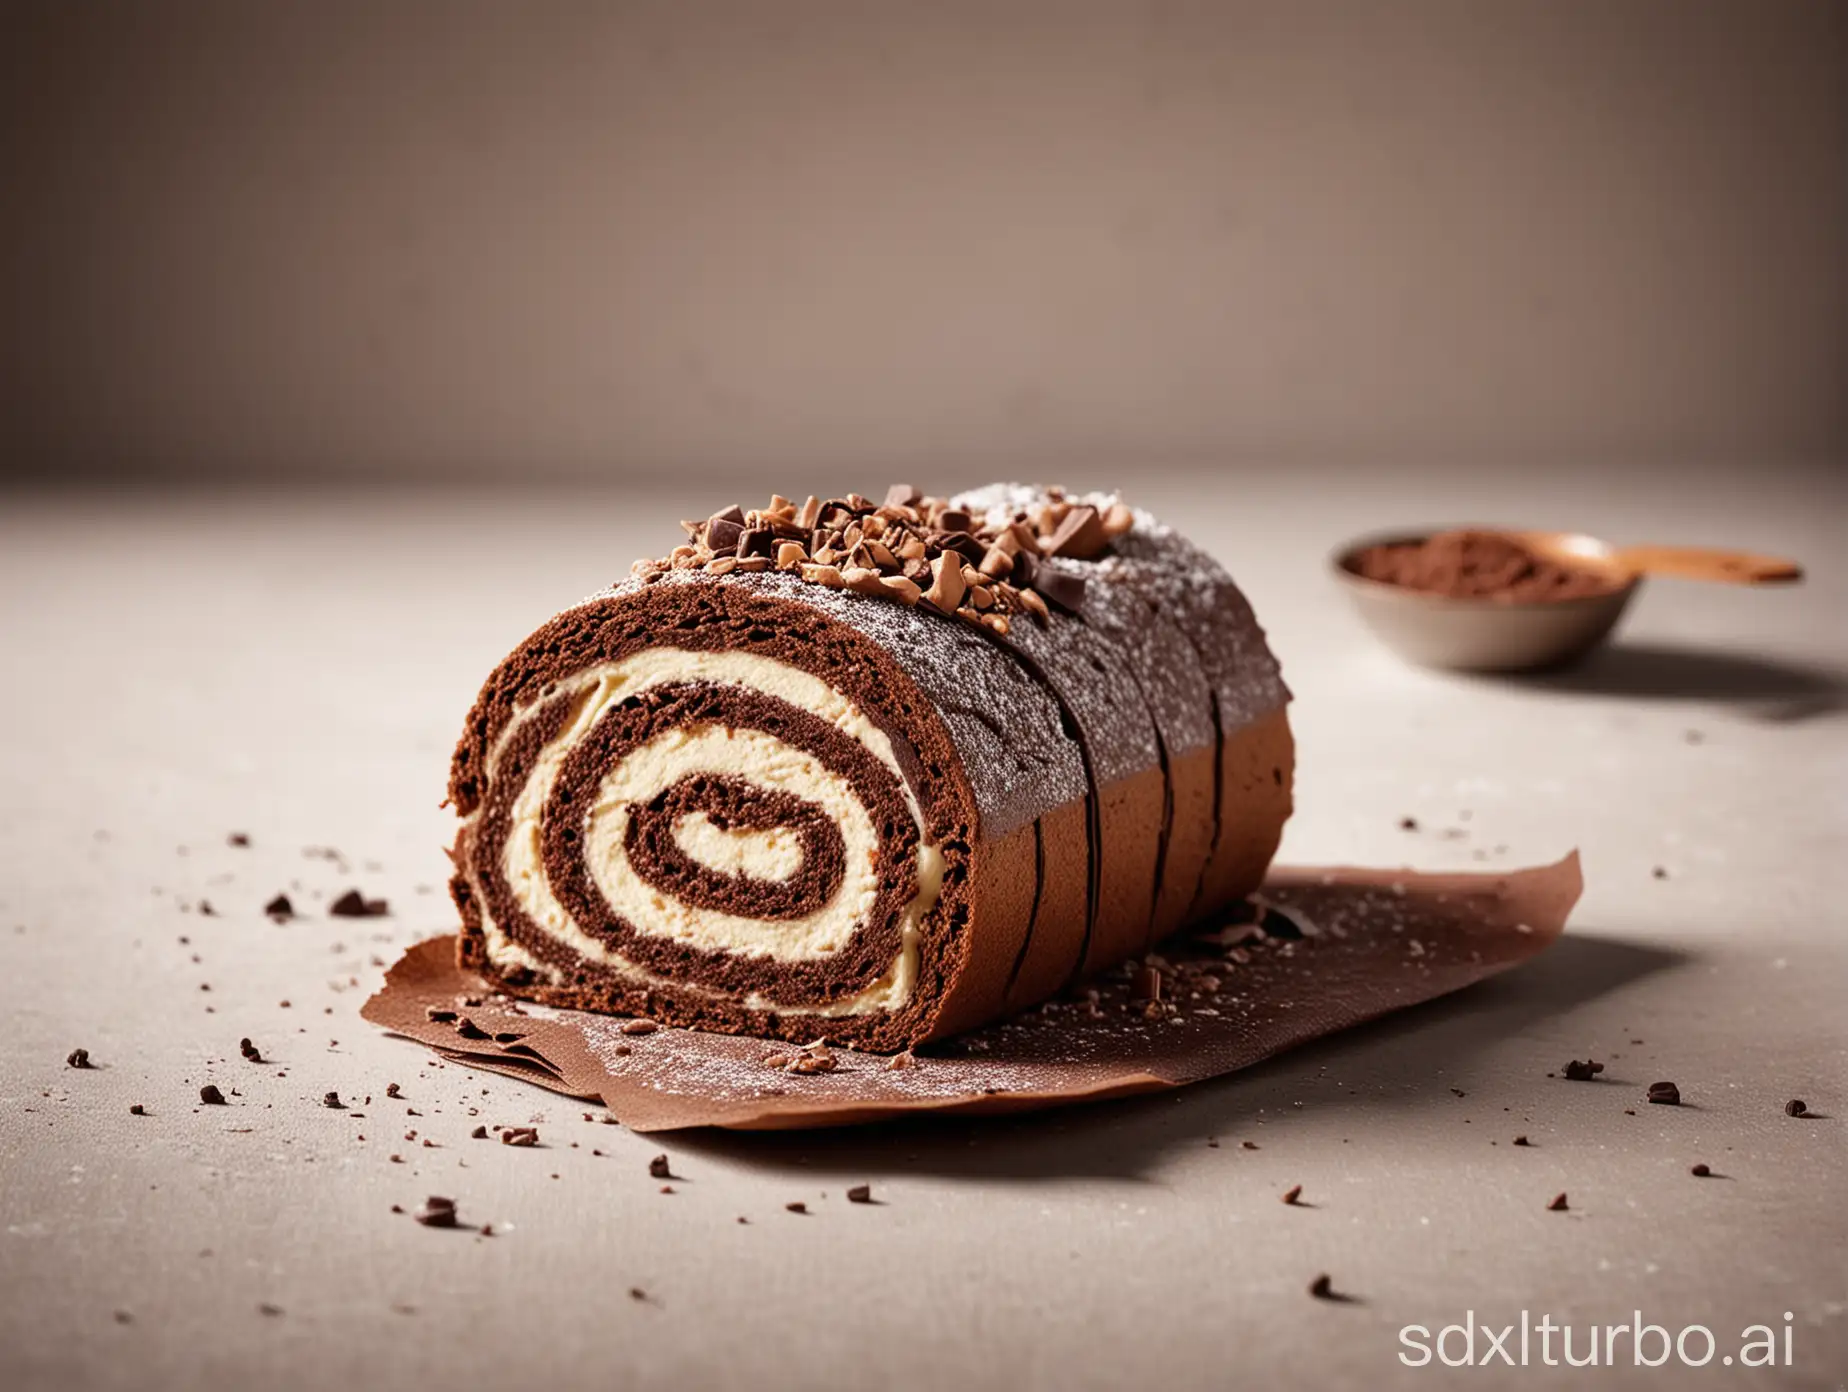 One chocolate cream Swiss roll, minimal background, magazine photography style, natural light, prime time shooting. Delicious Food Photography, shot with CanonEOS 5D MarkIV DSLR